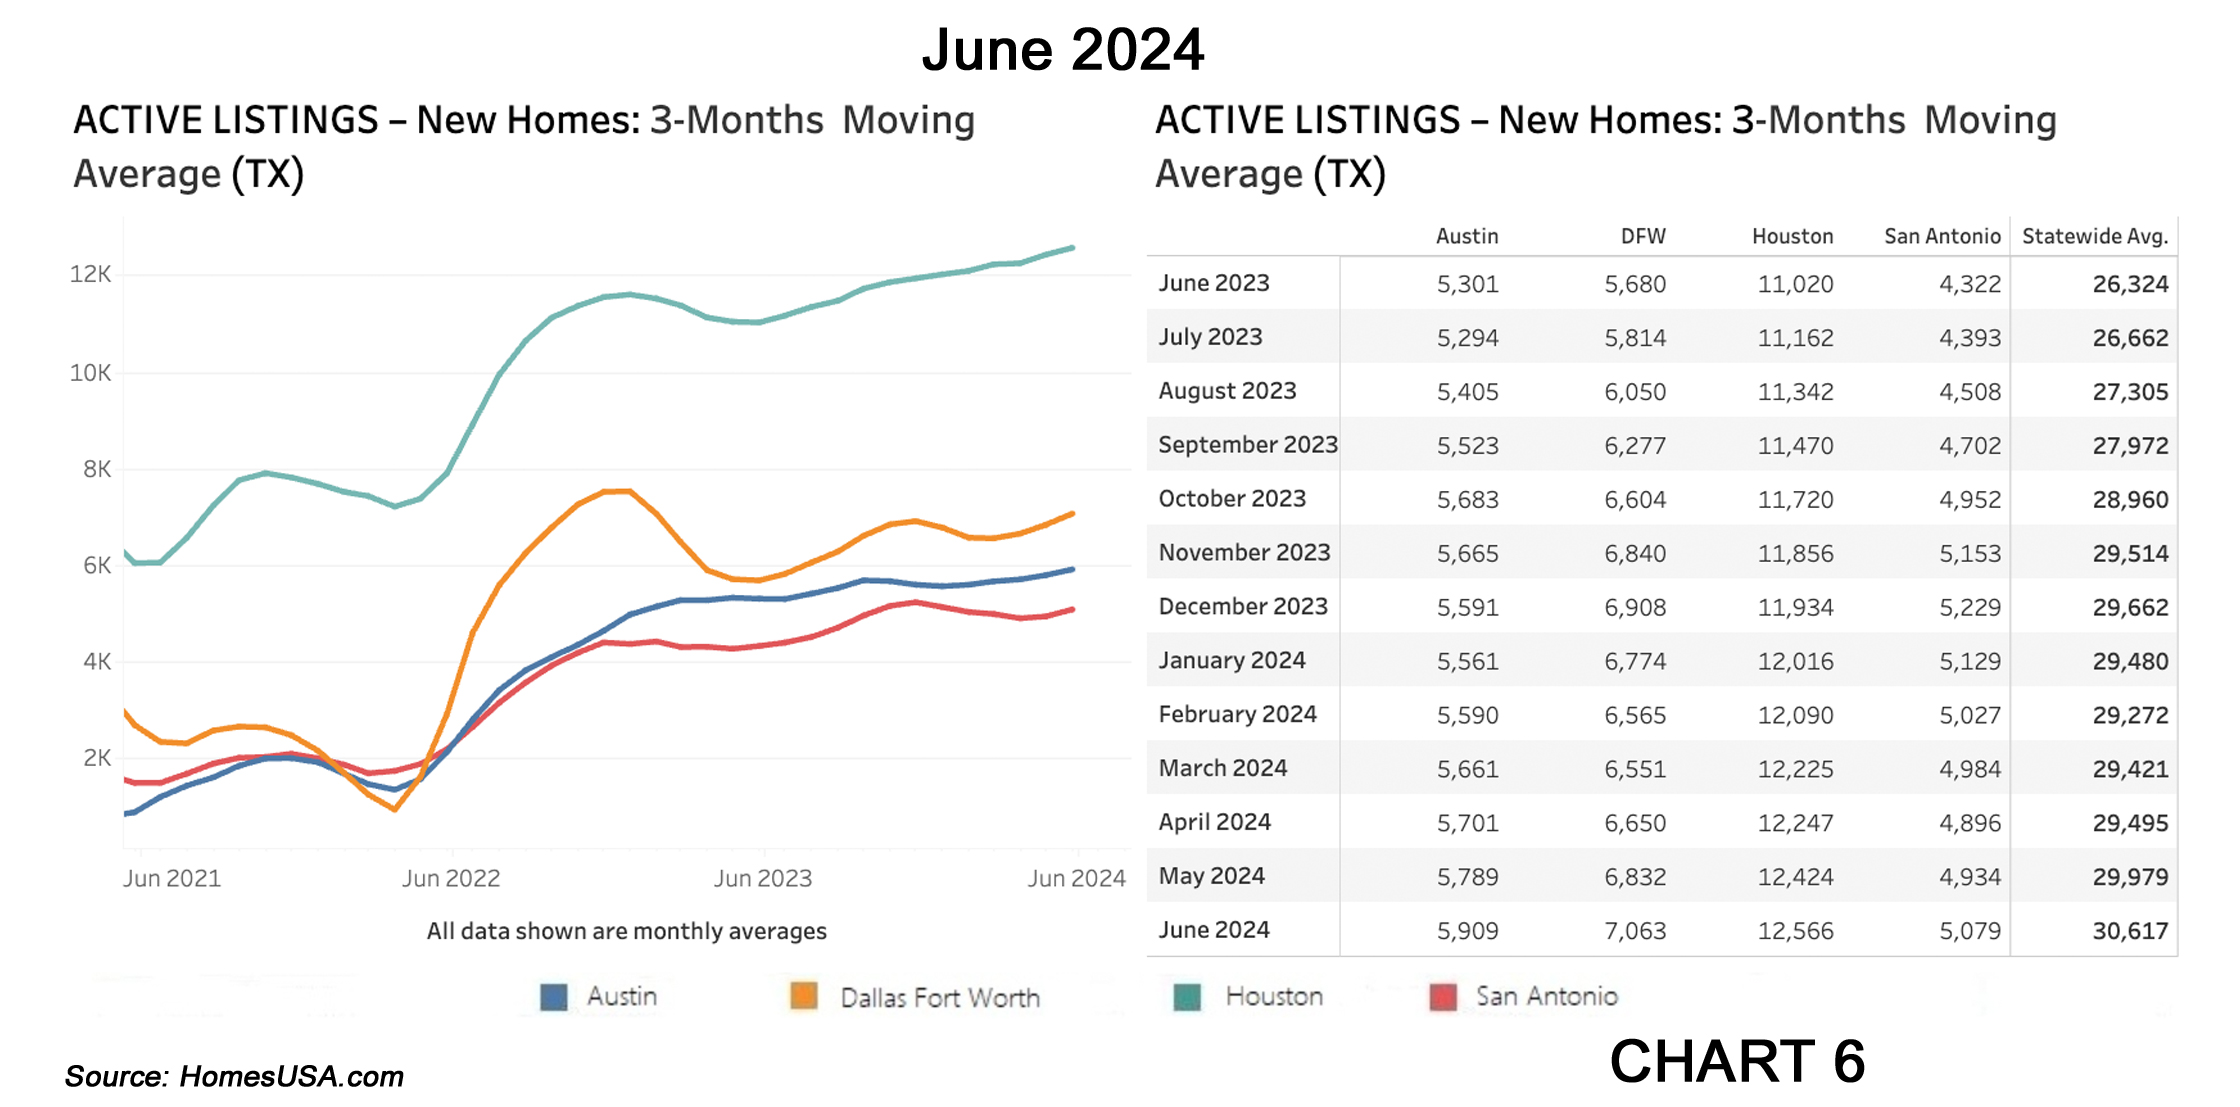 Chart 6: Texas Active Listings for New Home Market (Inventory) - June 2024